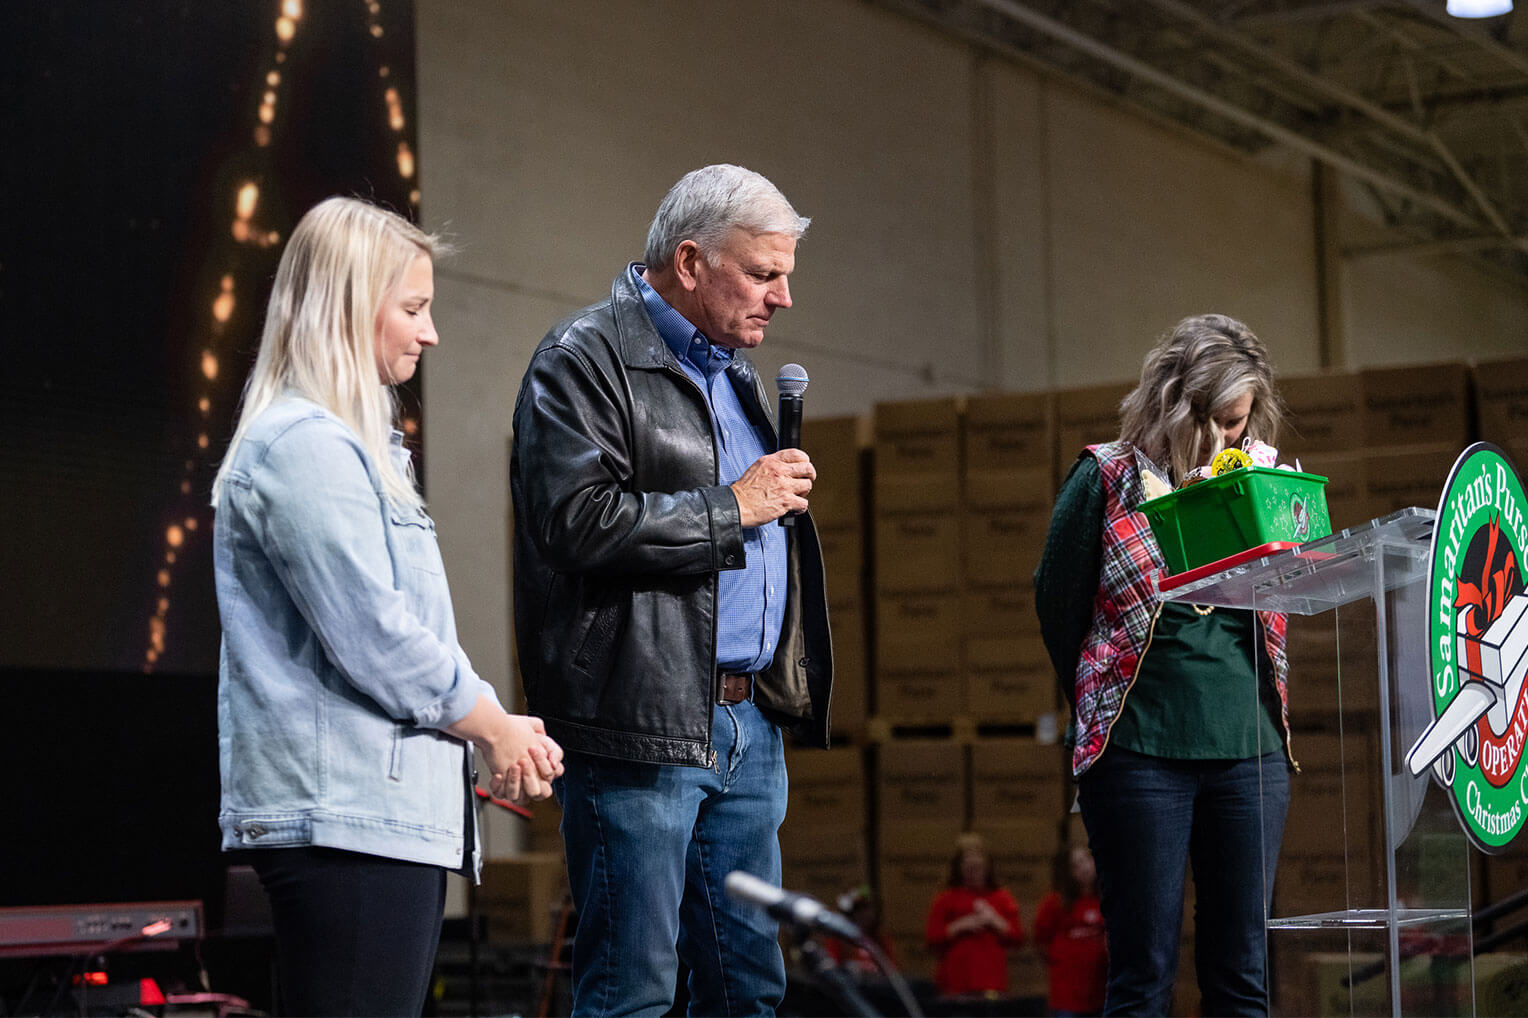 Franklin Graham prays for the millions of boys and girls in need across the globe who will soon be receiving shoebox gifts.